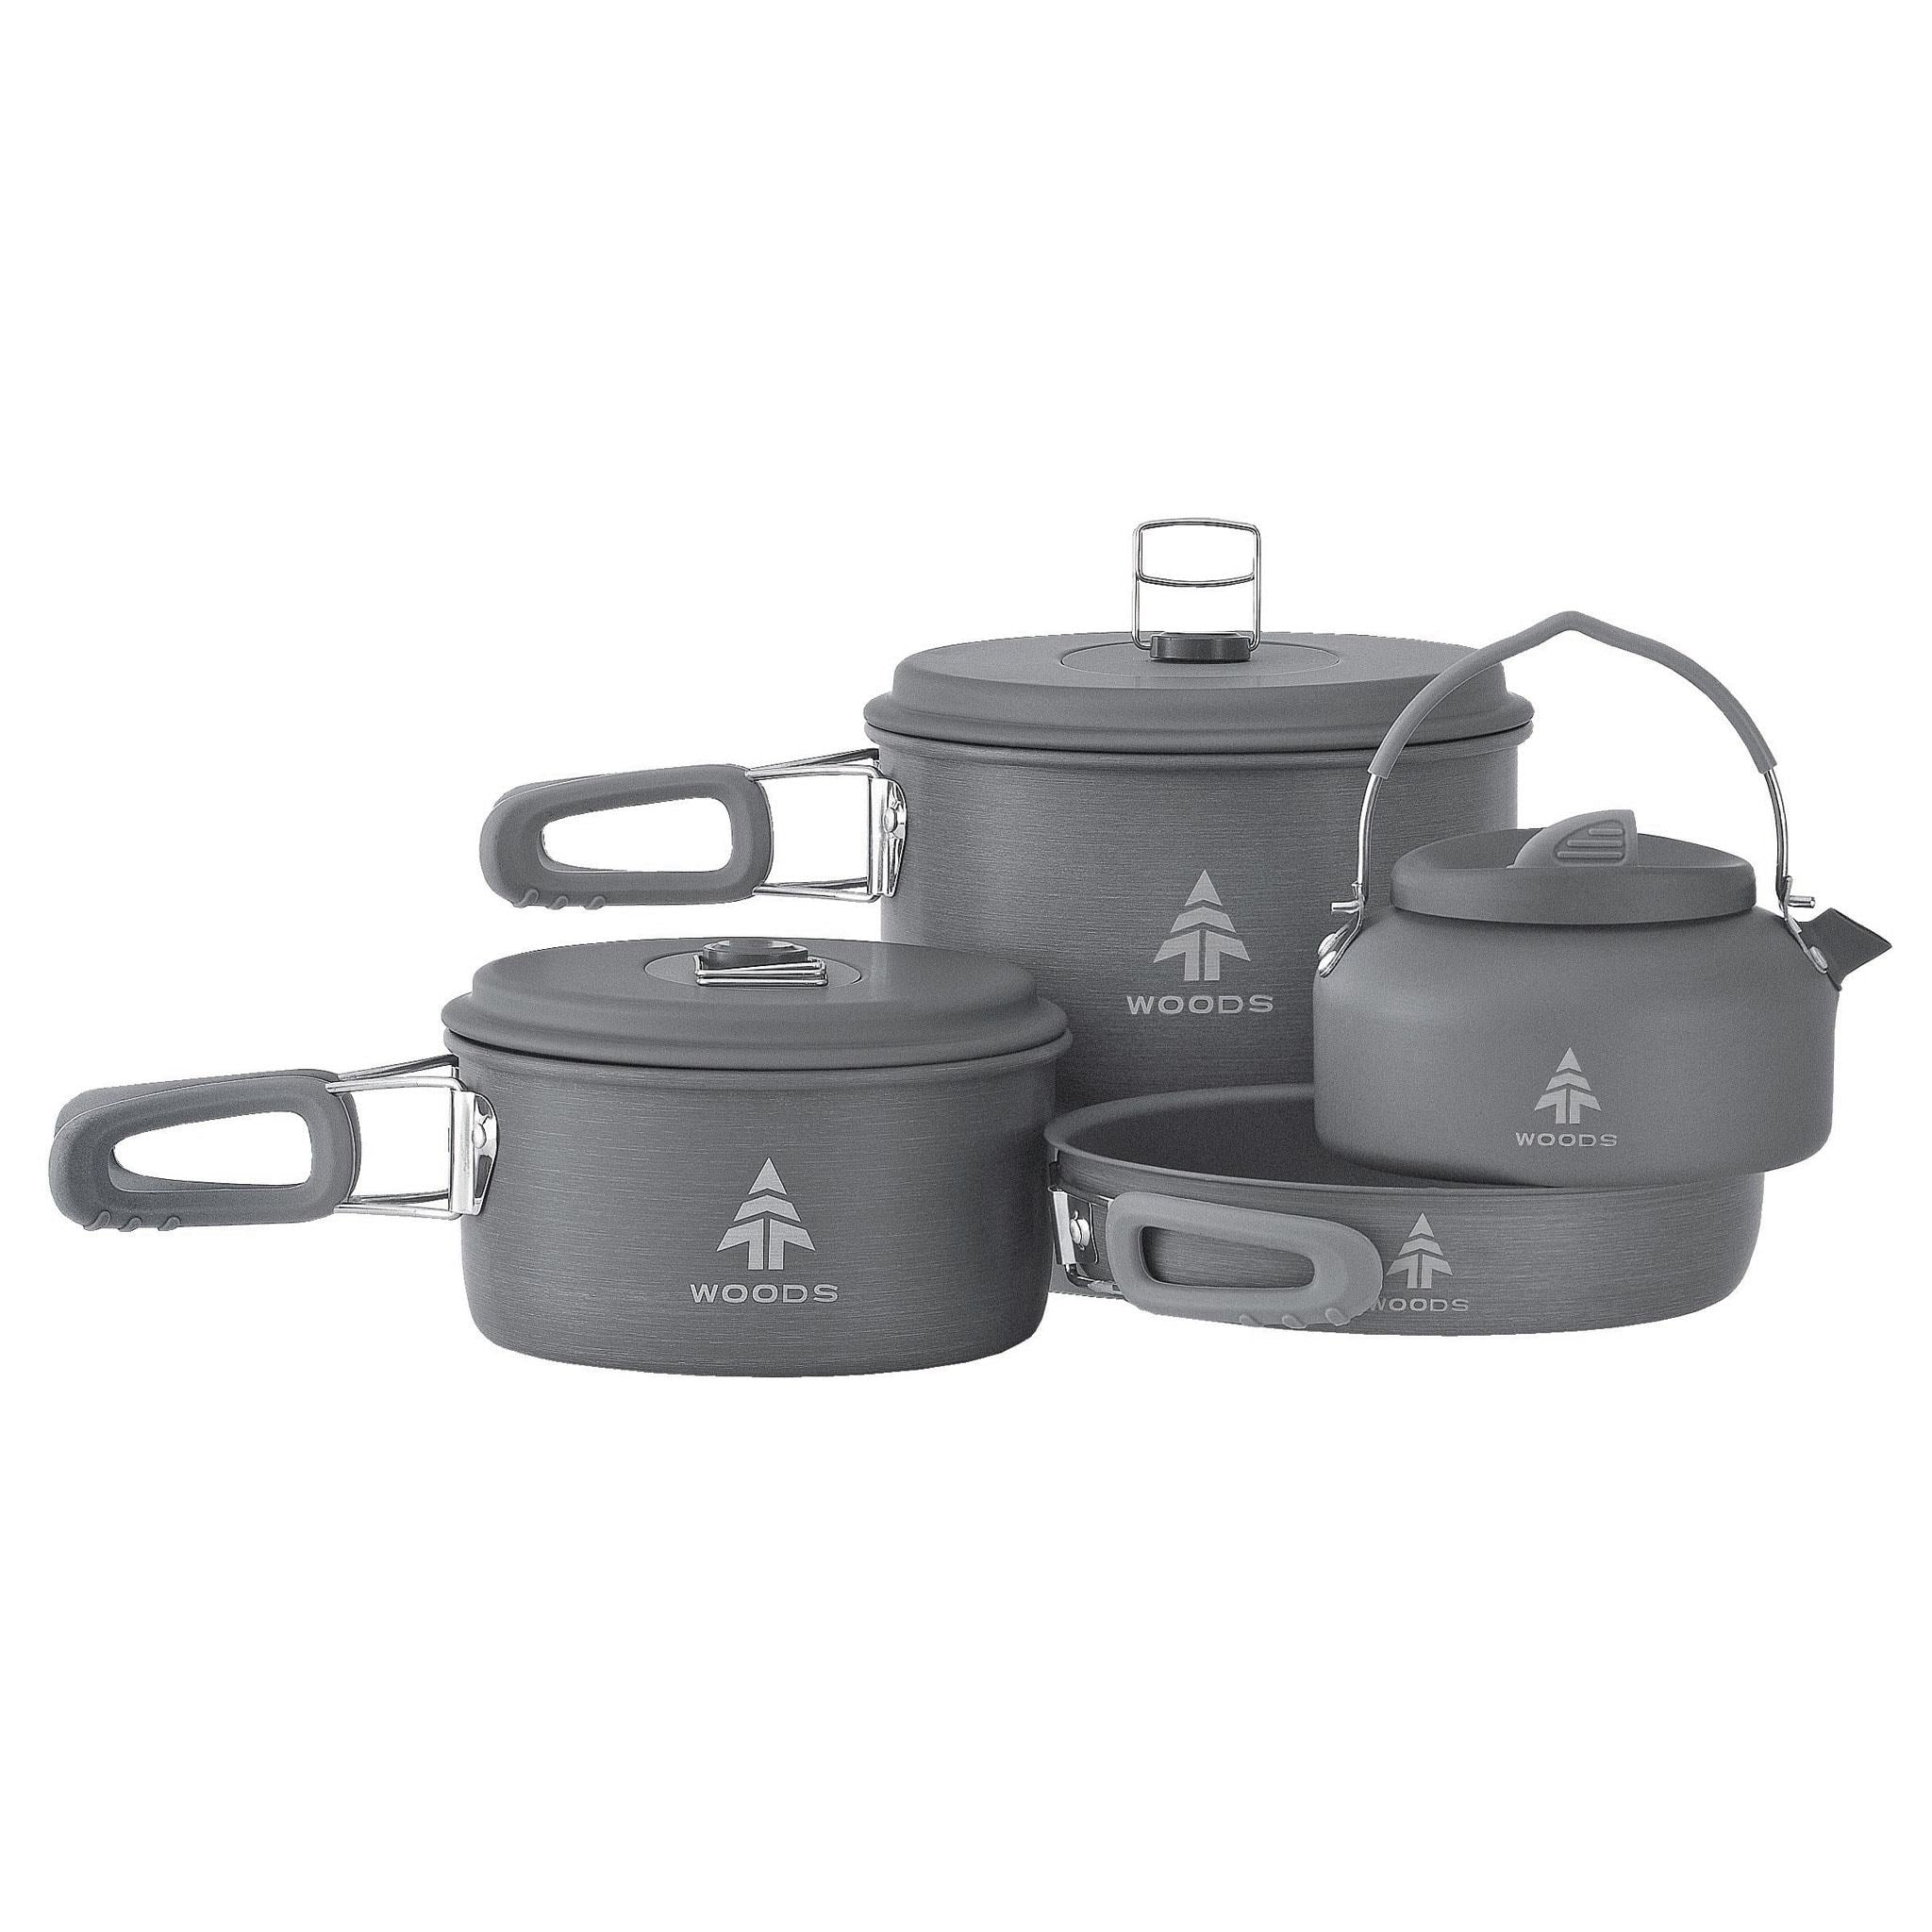 https://cdn.shopify.com/s/files/1/0052/7918/7015/products/woods-selkirk-anodized-4-pc-camping-cook-set_2048x.jpg?v=1586884009